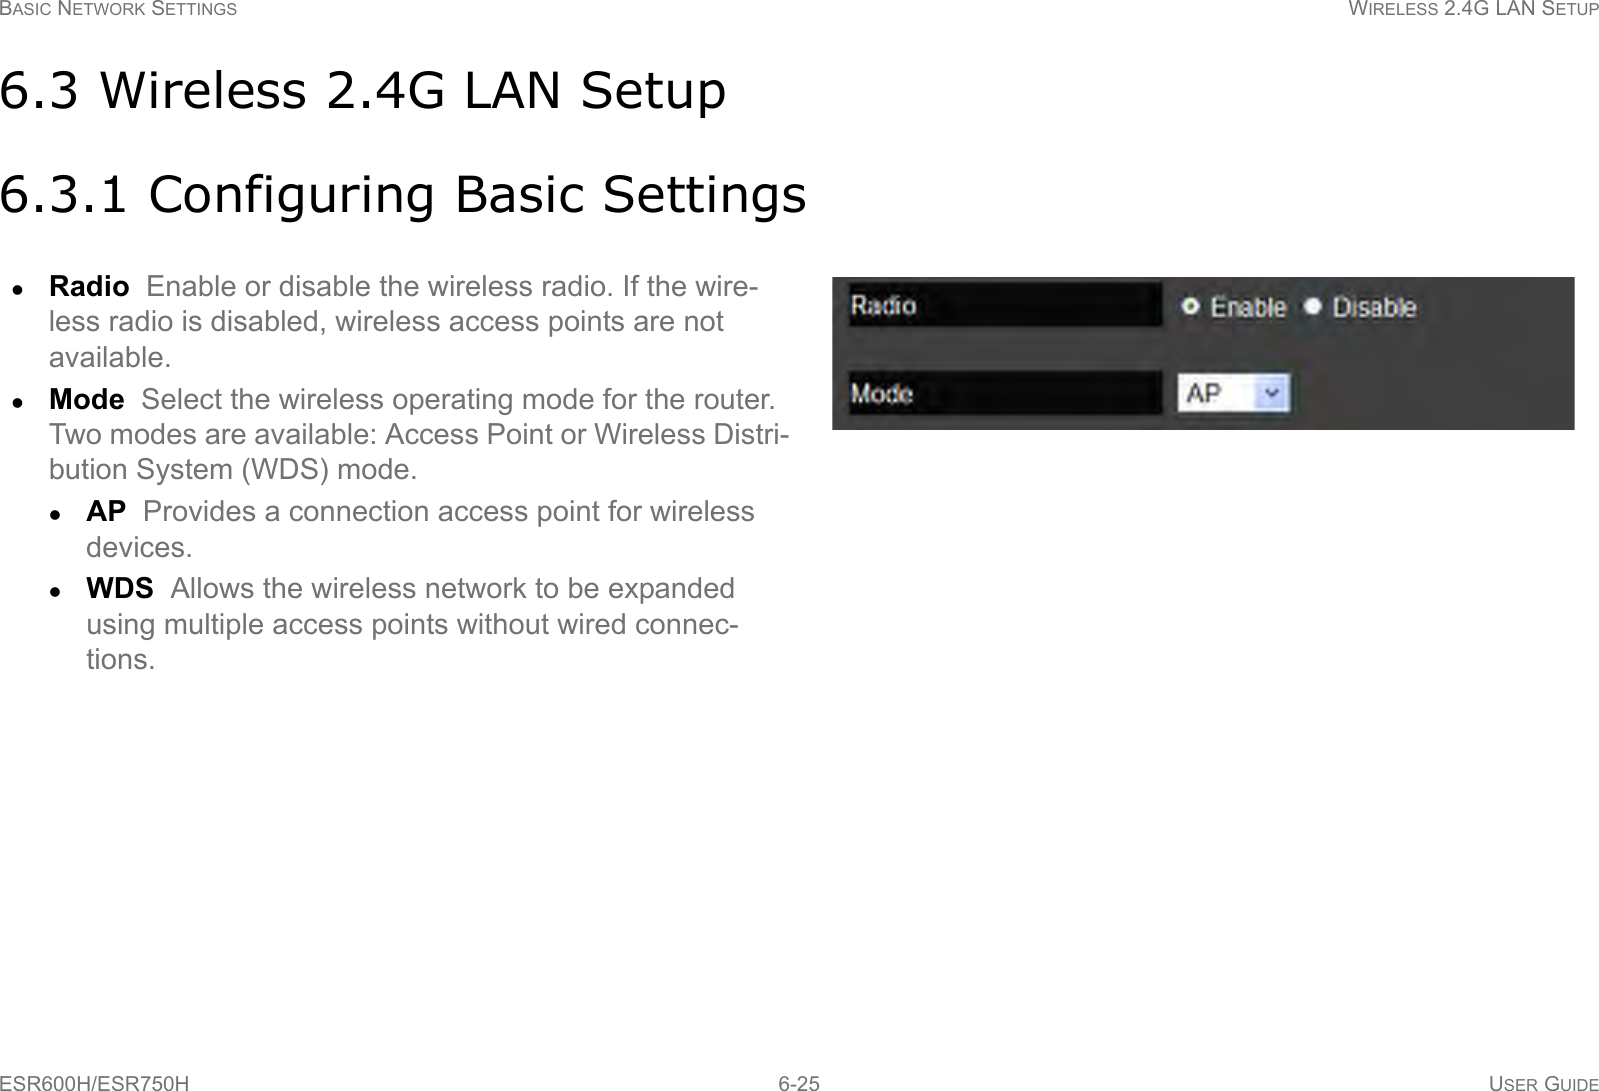 BASIC NETWORK SETTINGS WIRELESS 2.4G LAN SETUPESR600H/ESR750H 6-25 USER GUIDE6.3 Wireless 2.4G LAN Setup6.3.1 Configuring Basic SettingsRadio  Enable or disable the wireless radio. If the wire-less radio is disabled, wireless access points are not available.Mode  Select the wireless operating mode for the router. Two modes are available: Access Point or Wireless Distri-bution System (WDS) mode.AP  Provides a connection access point for wireless devices.WDS  Allows the wireless network to be expanded using multiple access points without wired connec-tions.